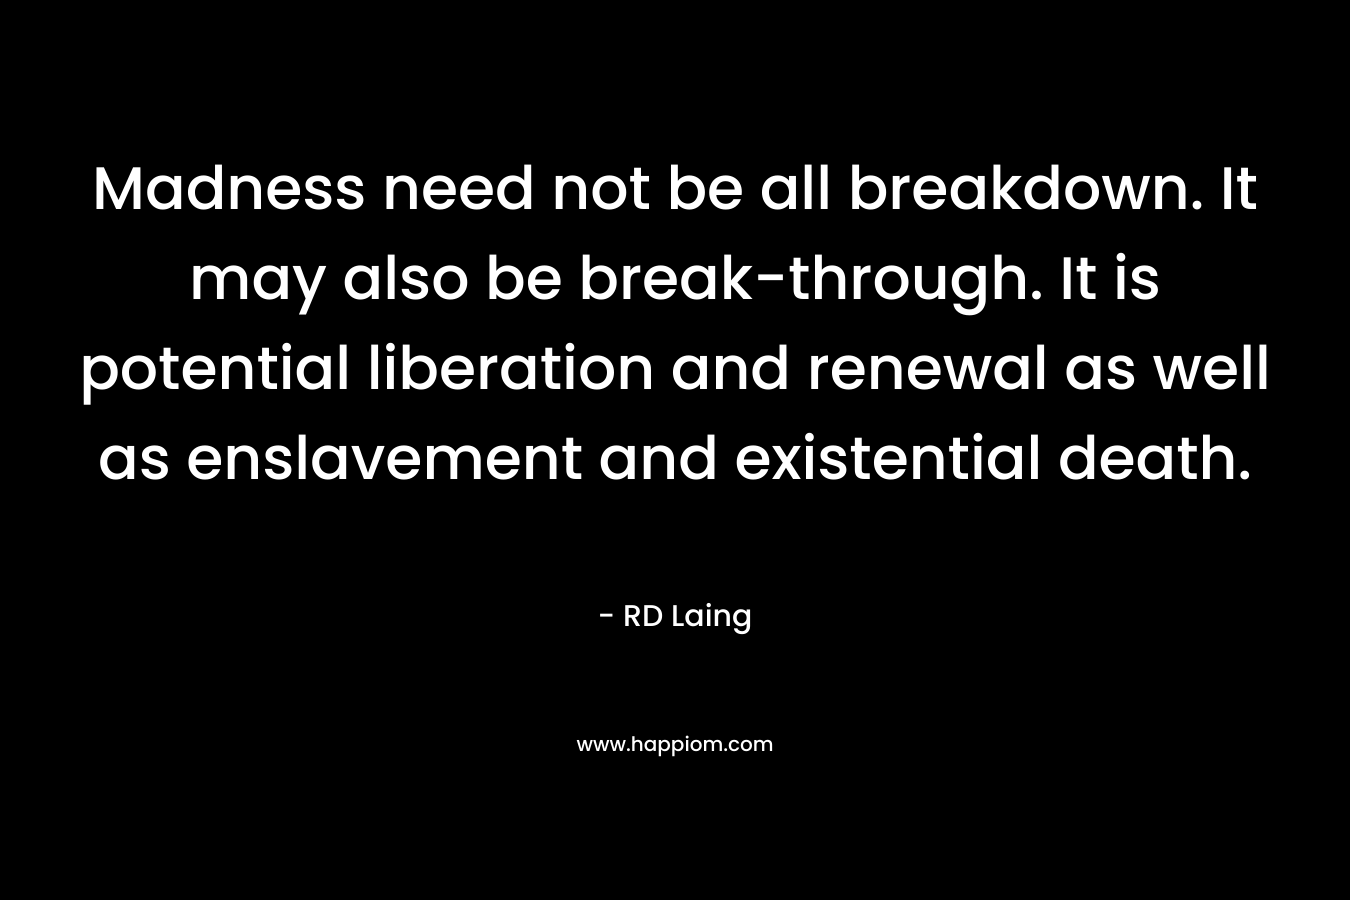 Madness need not be all breakdown. It may also be break-through. It is potential liberation and renewal as well as enslavement and existential death. – RD Laing